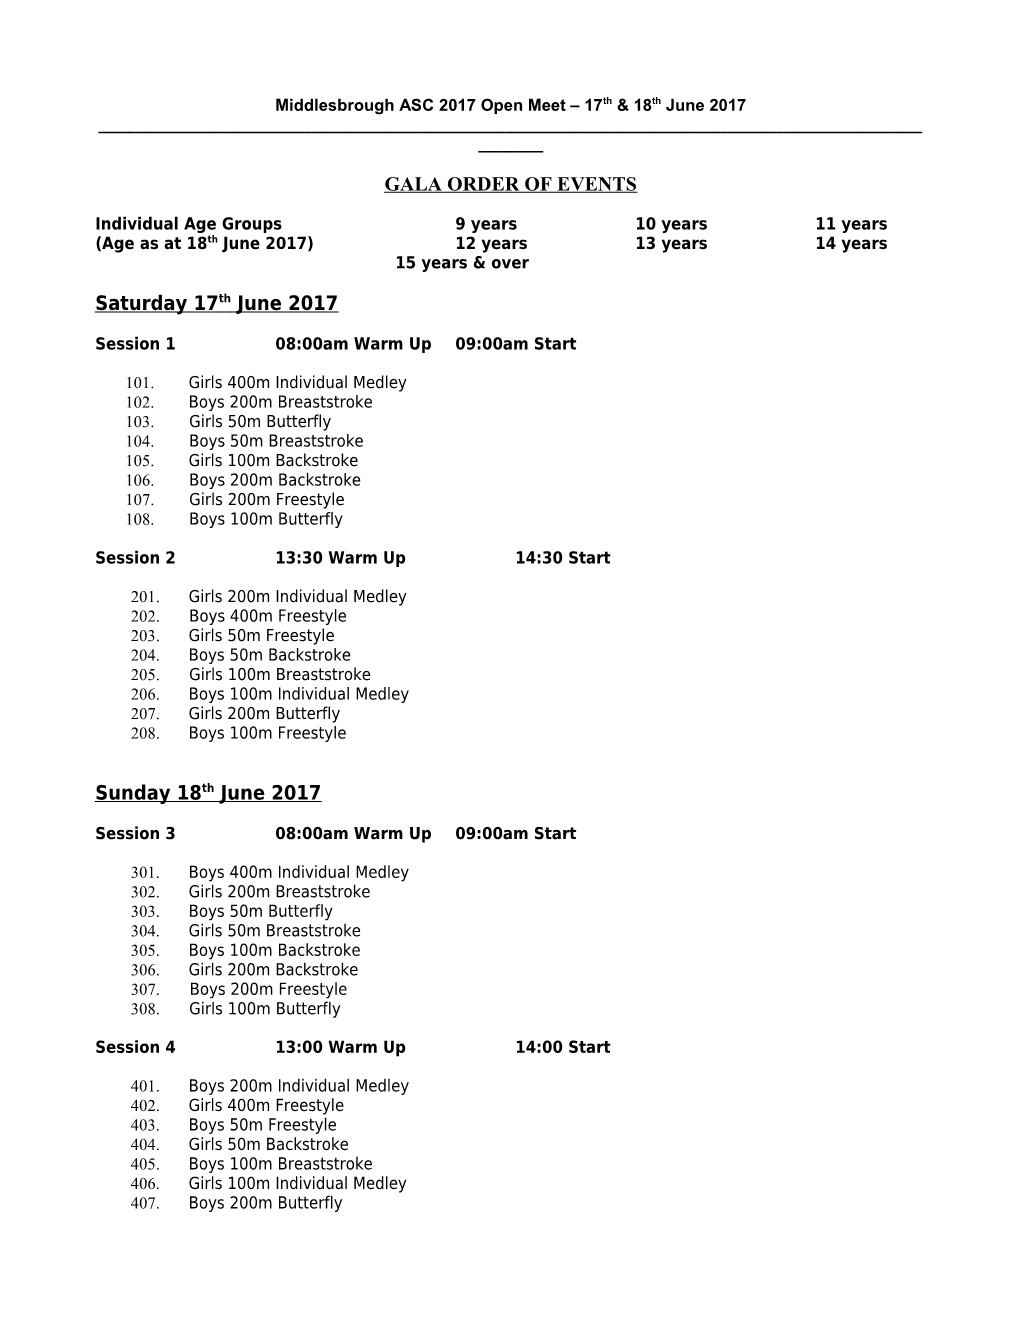 Gala Order of Events